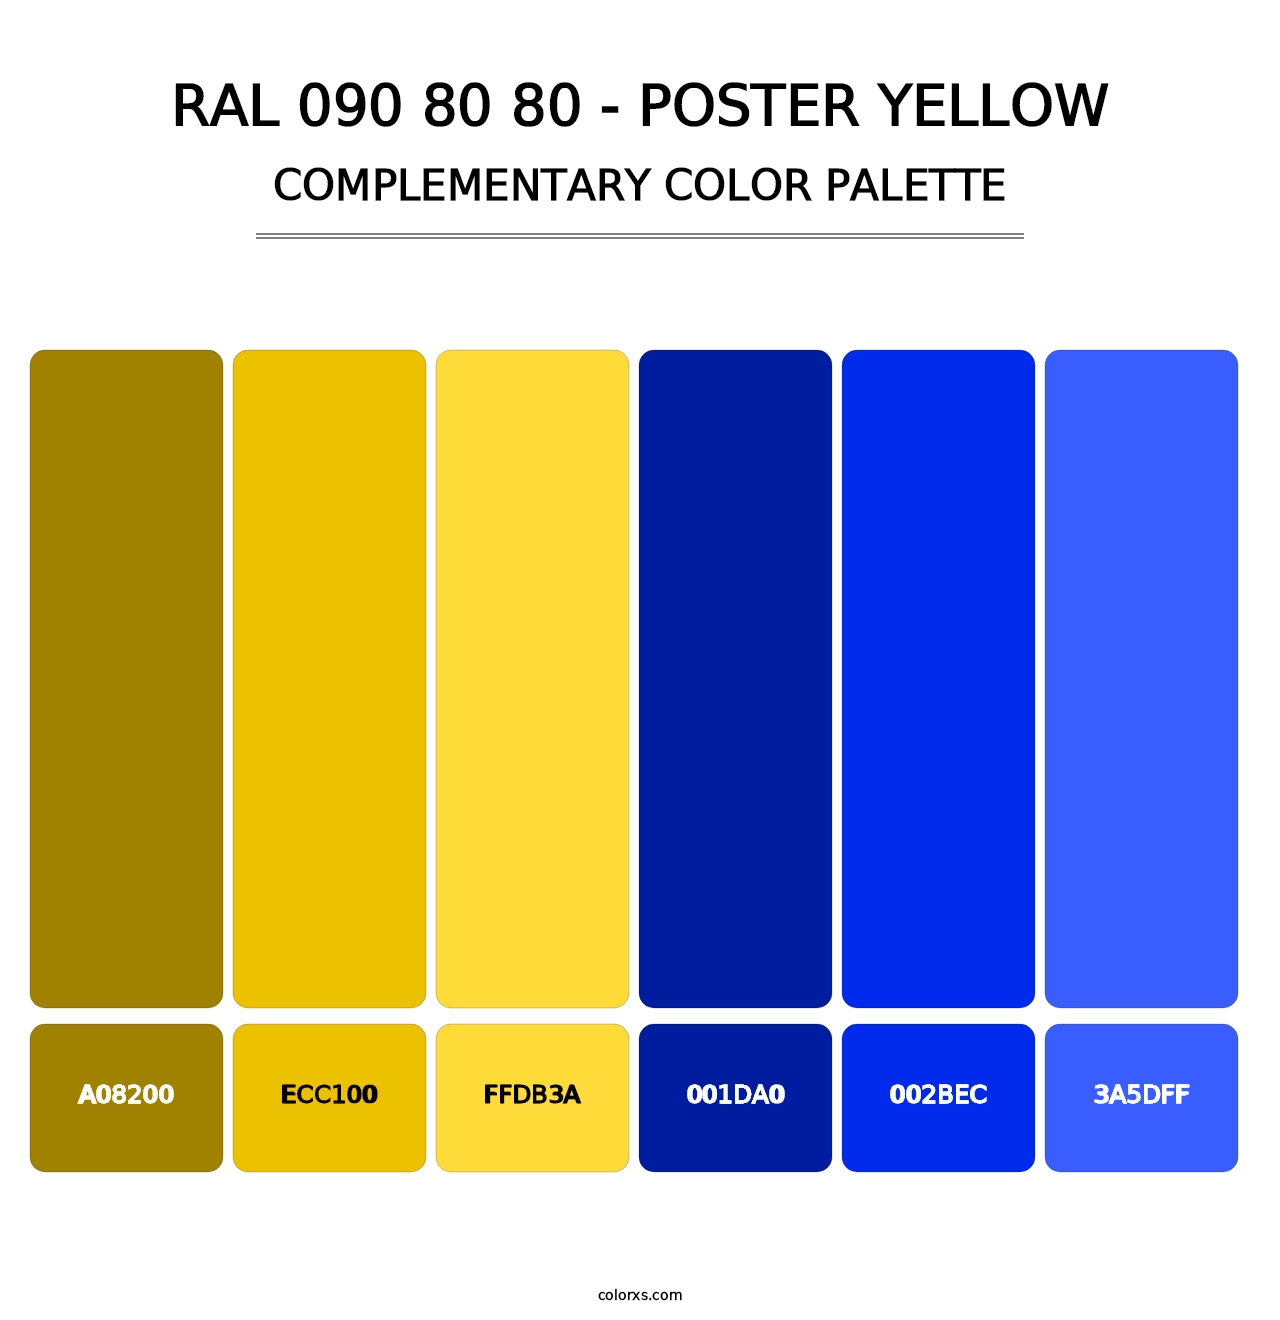 RAL 090 80 80 - Poster Yellow - Complementary Color Palette